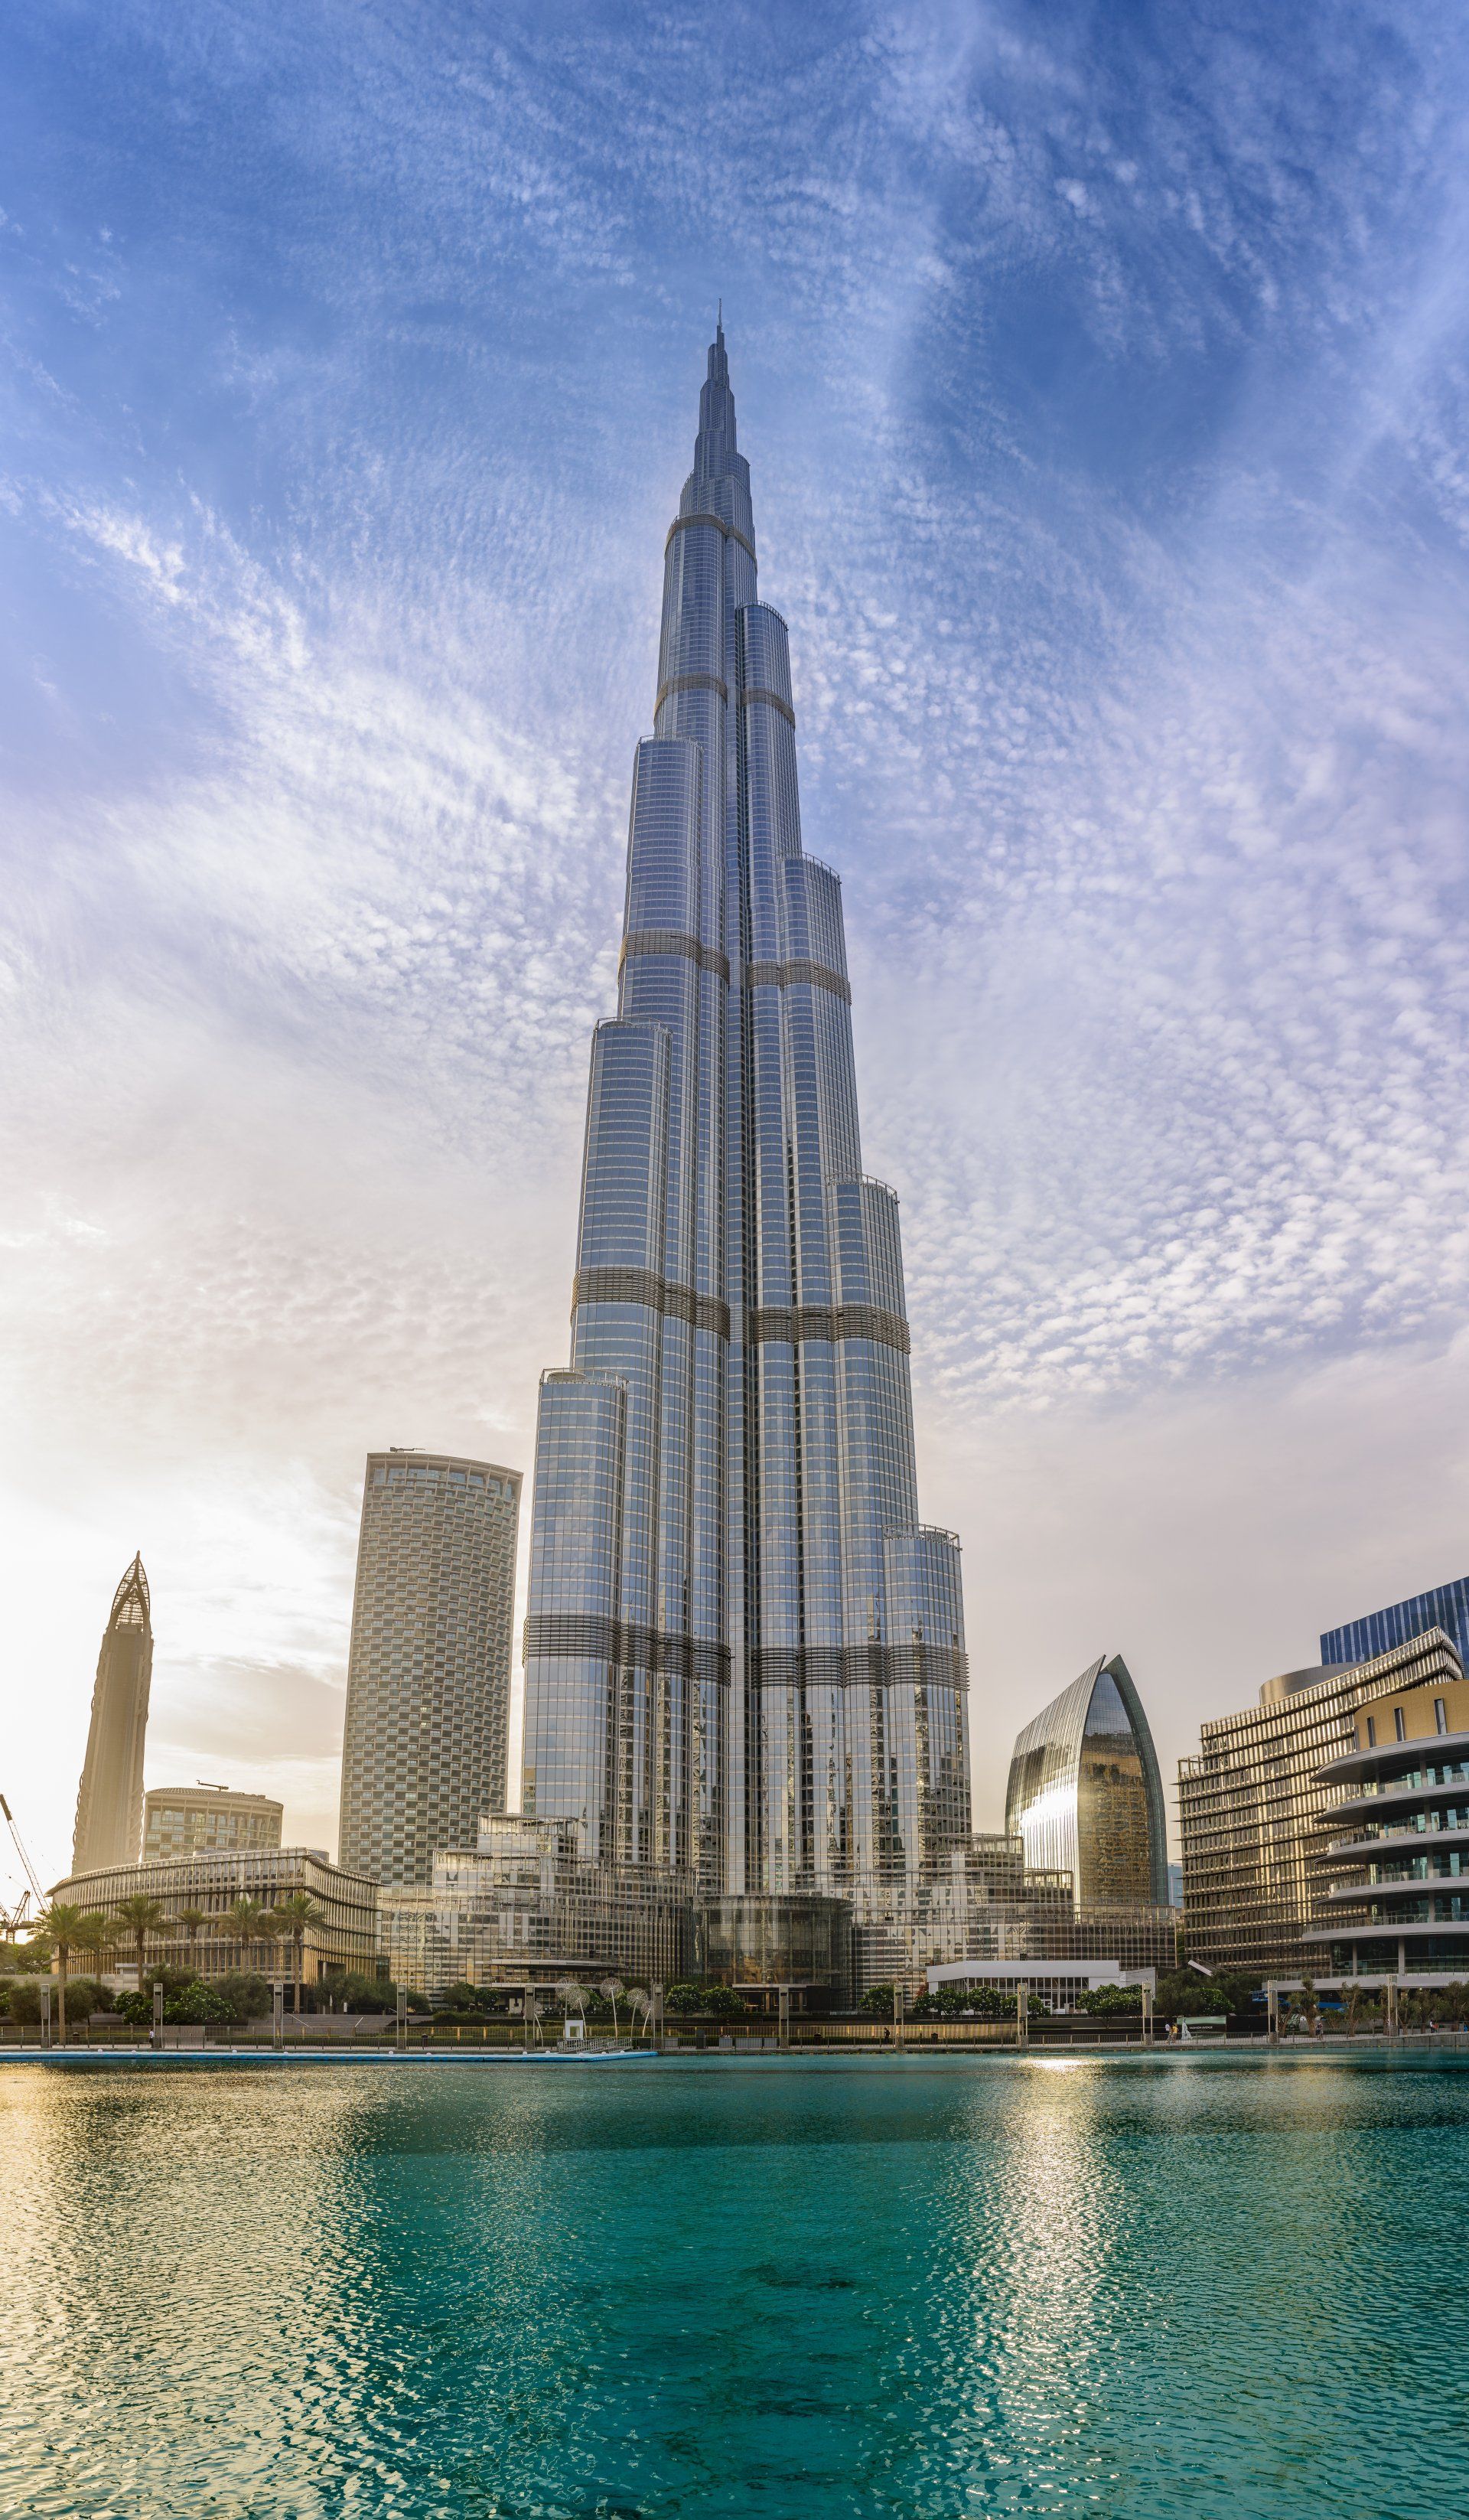 The burj khalifa is the tallest building in the world.